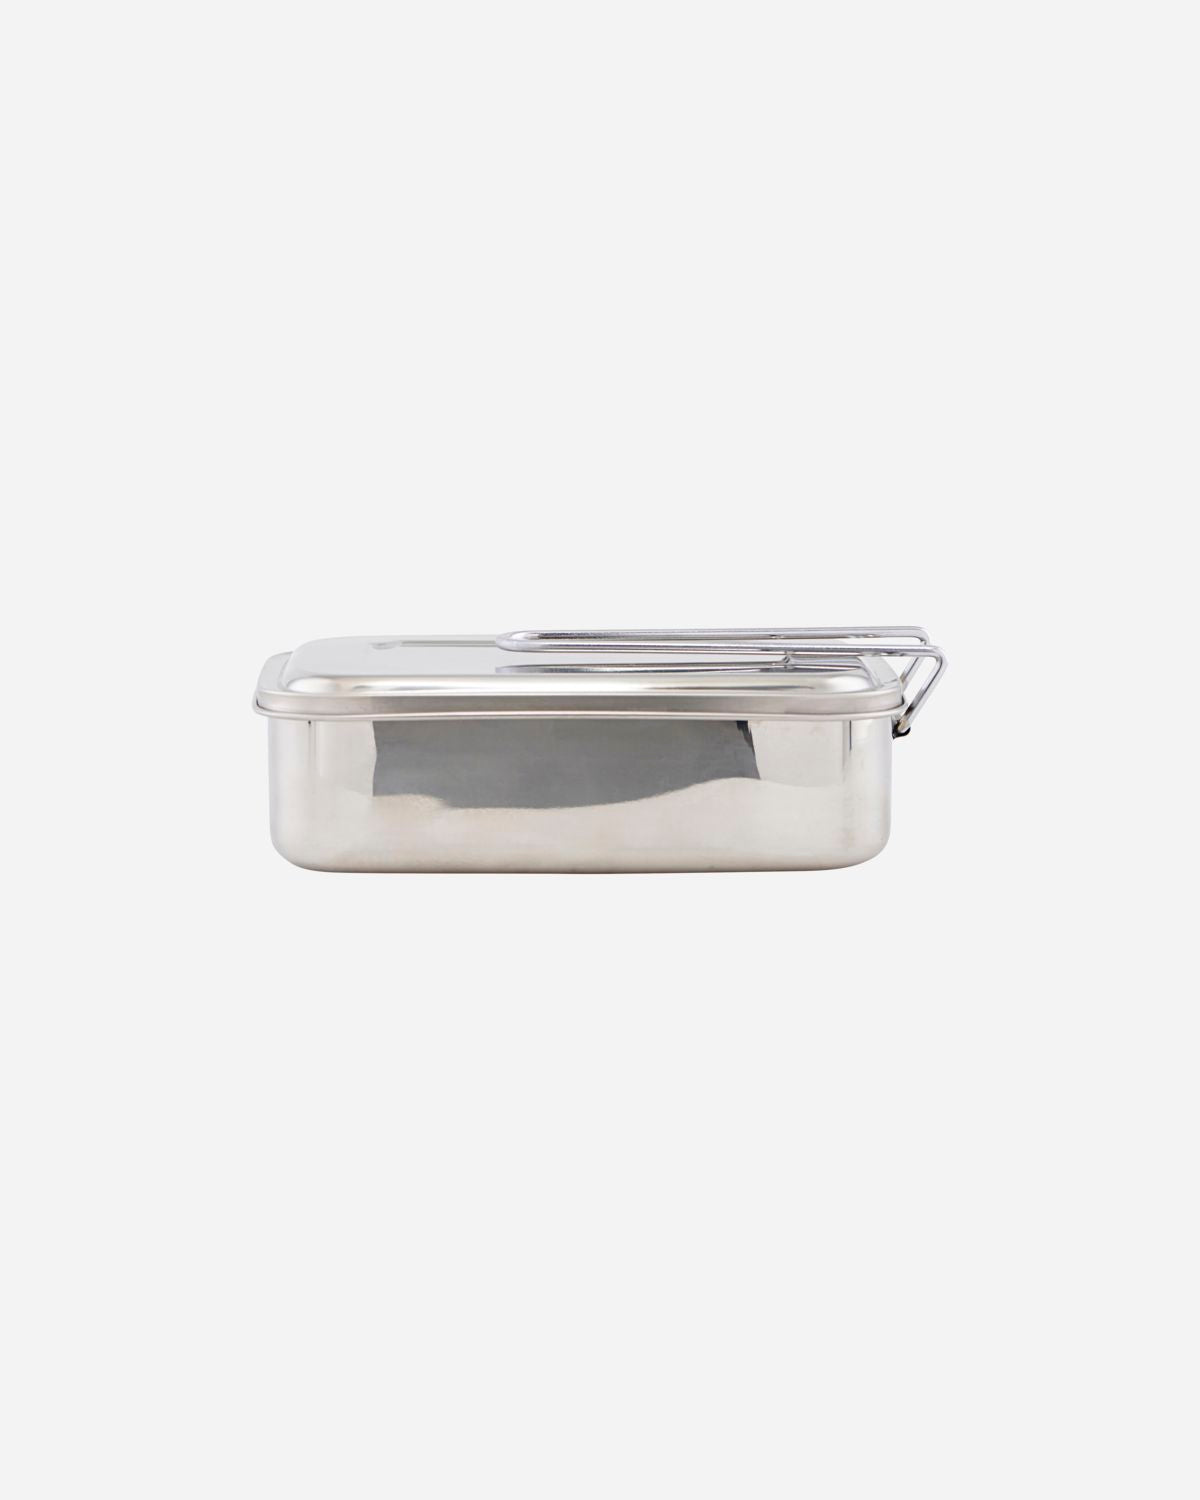 Lunch box, Boxit, Silver finish House Doctor